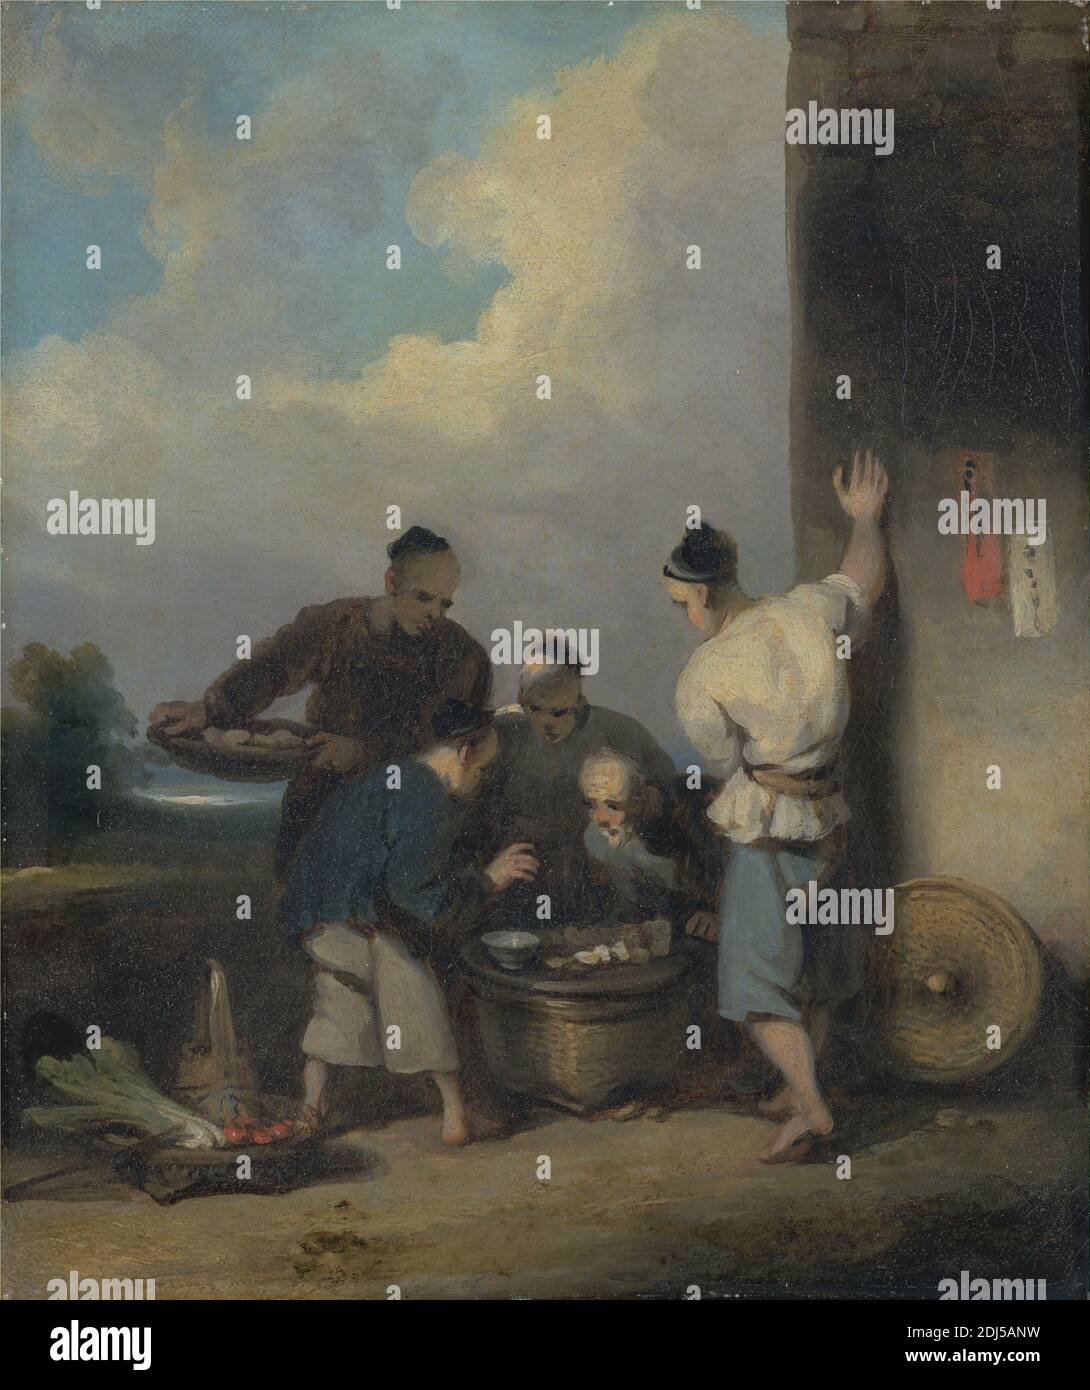 Coolies Round the Food Vendor's Stall, George Chinnery, 1774–1852, British, after 1825, Oil on canvas, Support (PTG): 9 1/2 x 8 1/8 inches (24.1 x 20.6 cm), basket, blue, bowl (vessel), boy, brown, Chinese, food, genre subject, market (event), men, vendor, wall, white (color), workers, Asia, China Stock Photo